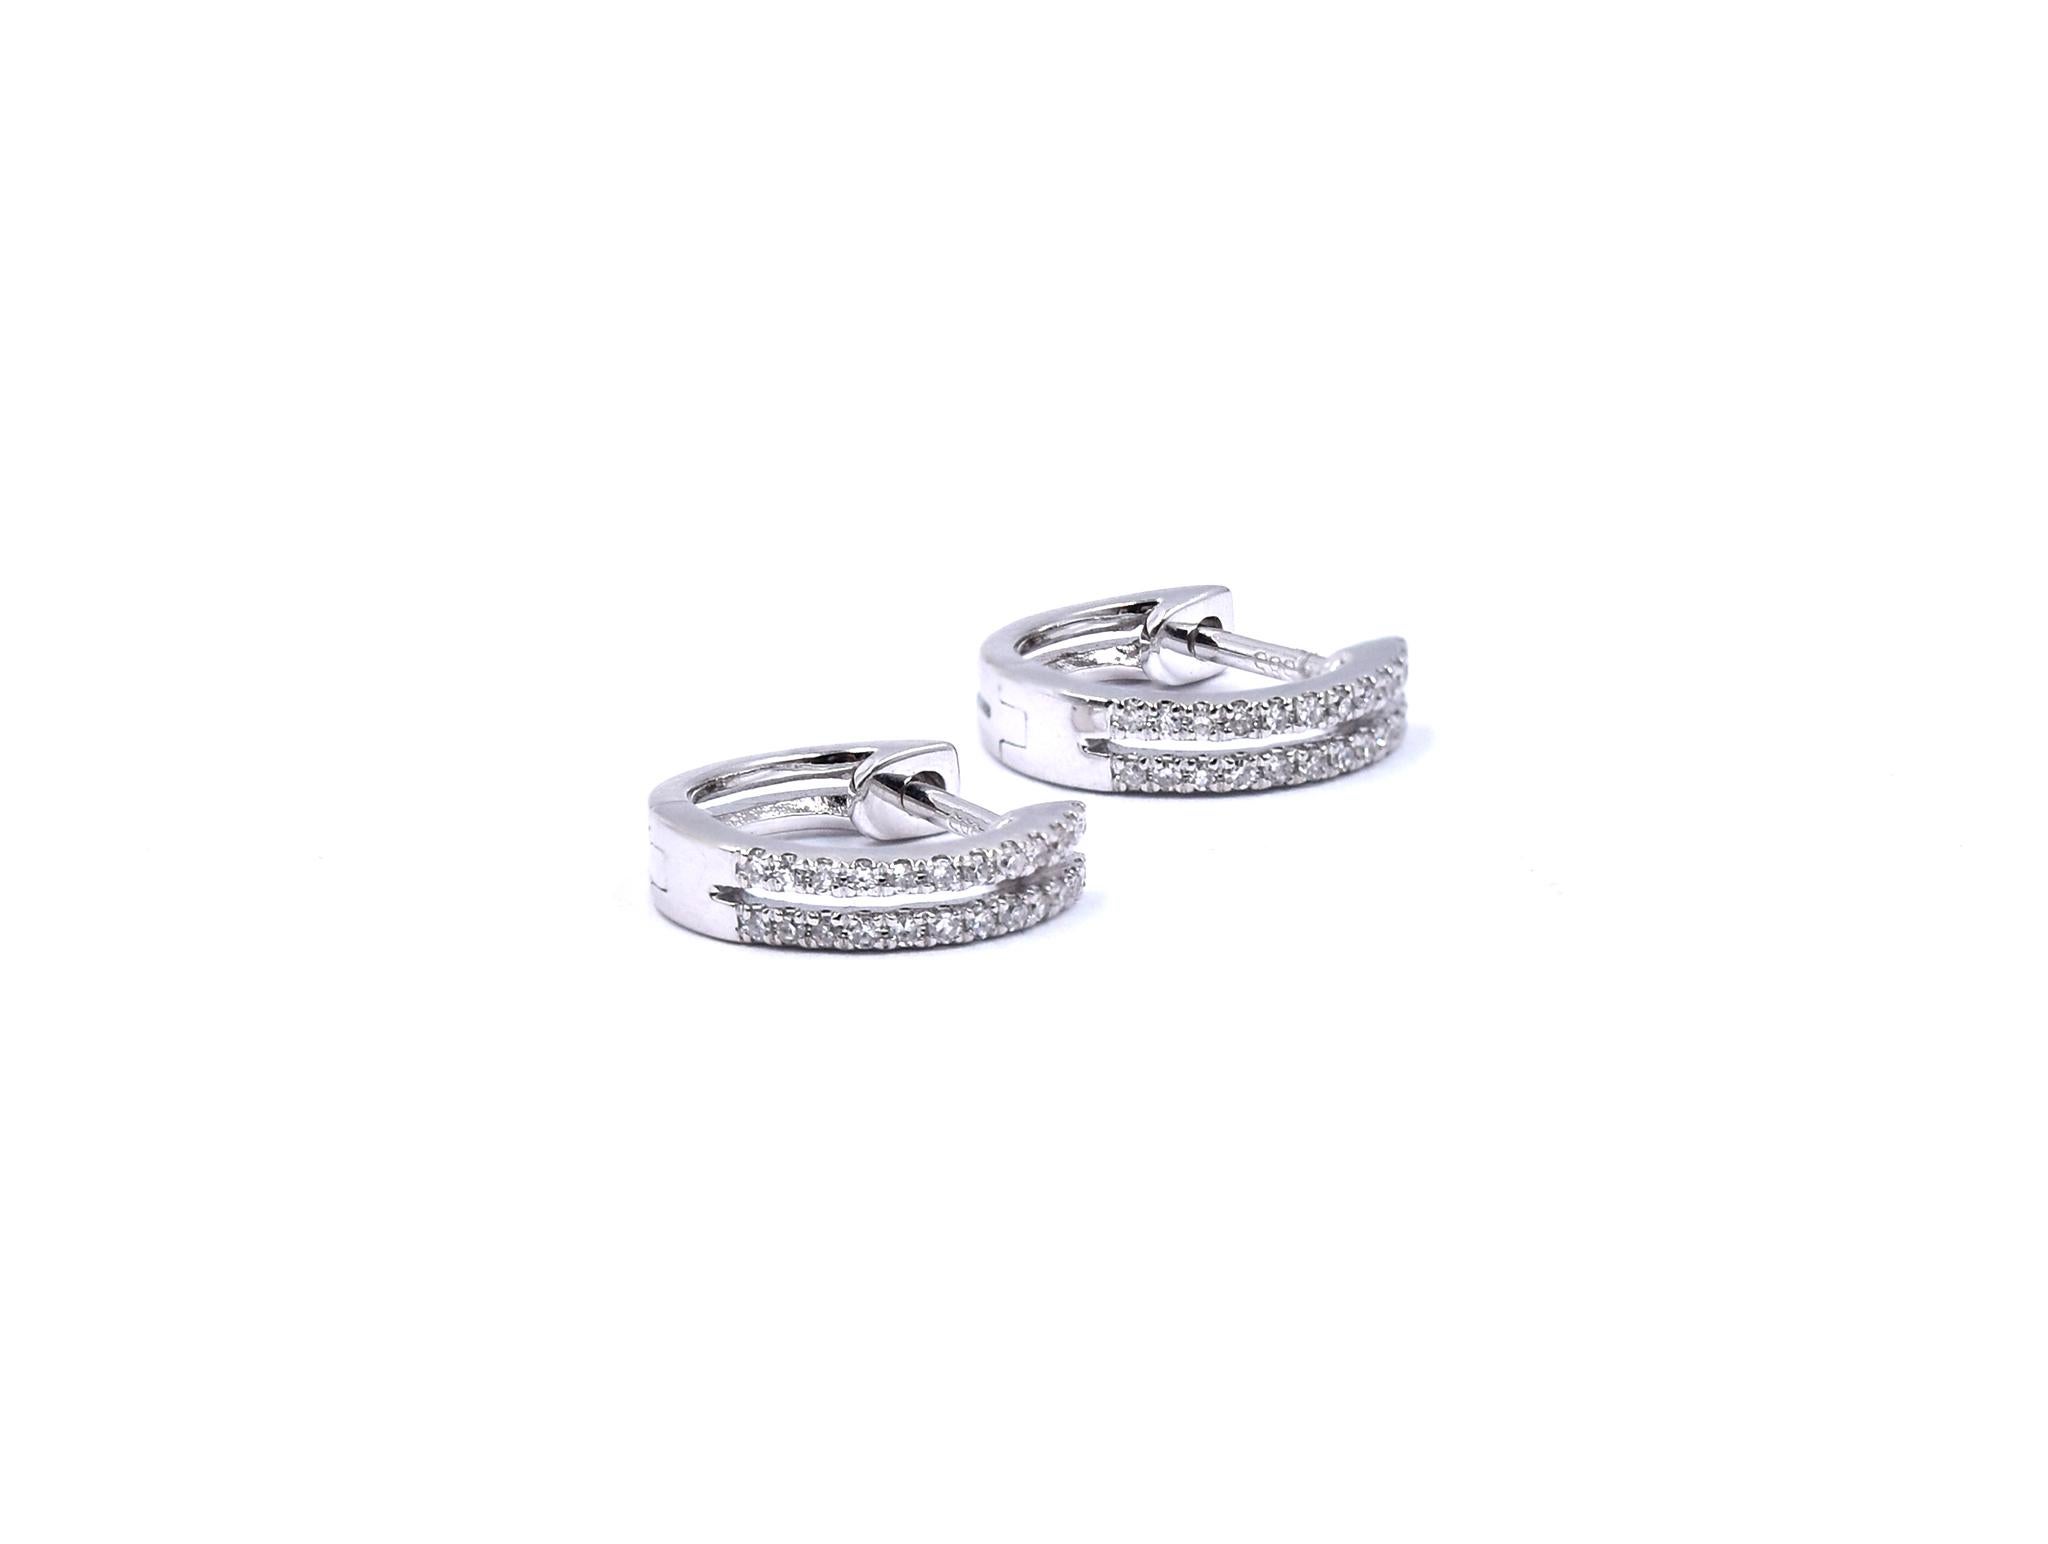 Material: 14K white gold
Diamonds: 48 single cut = .12cttw
Color: H
Clarity: I1
Dimensions: earrings measure 11.8 X 2.66mm
Fastenings: snap closure
Weight: 2.0 grams
